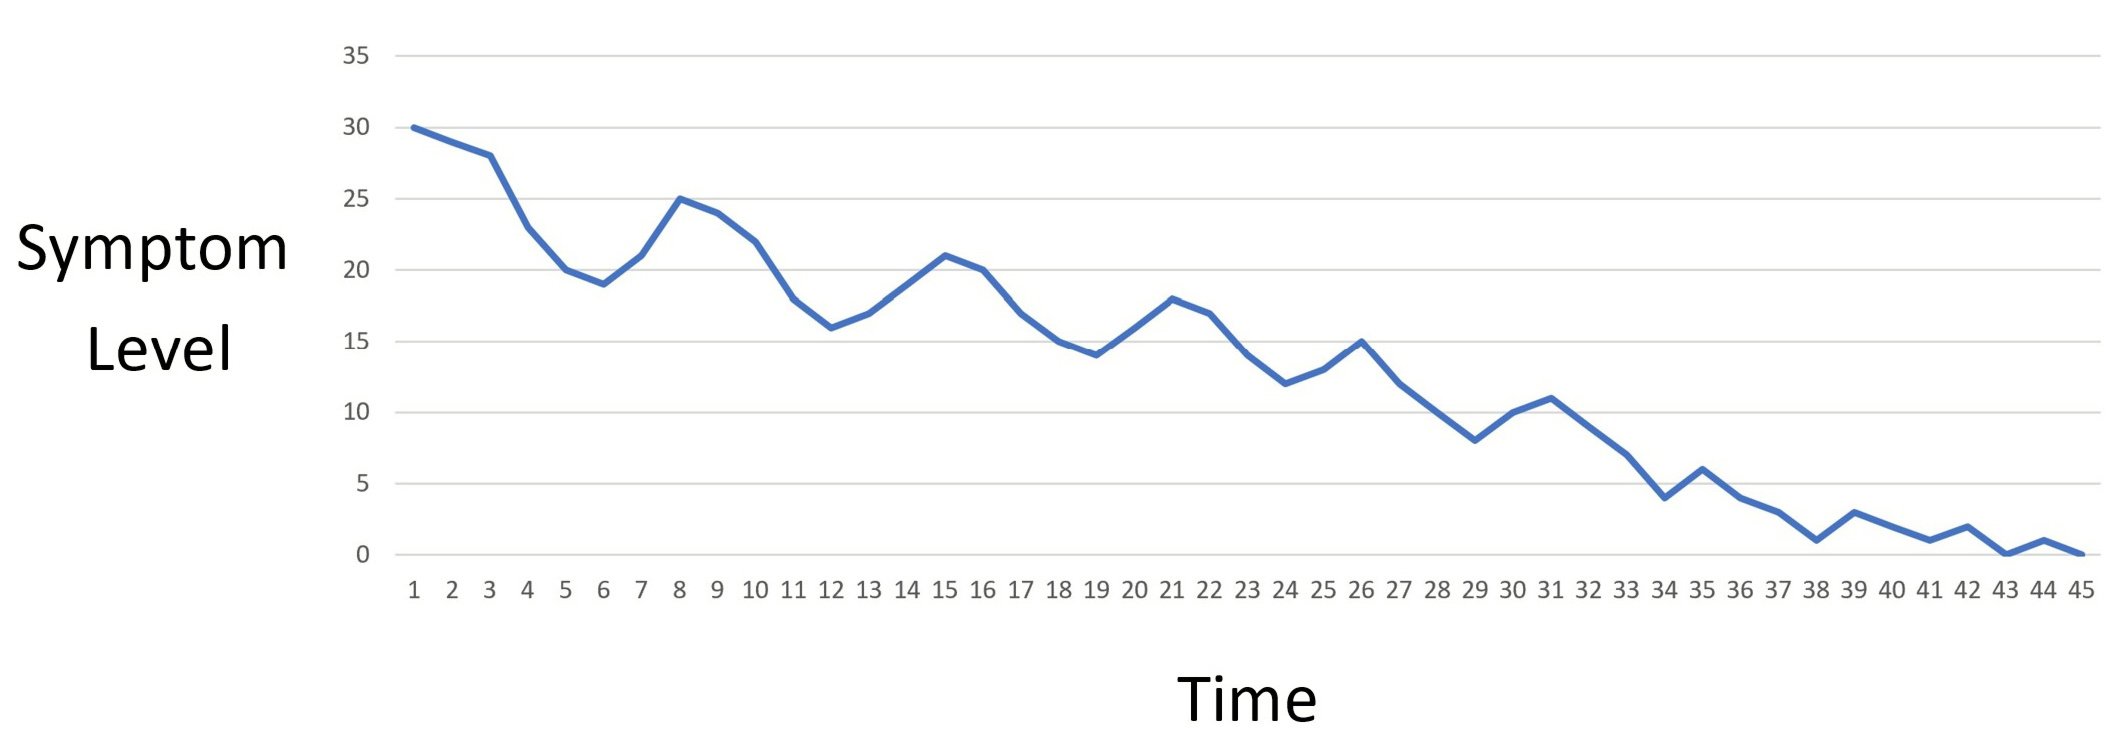 concussion recovery curve of symptom fluctuation over time